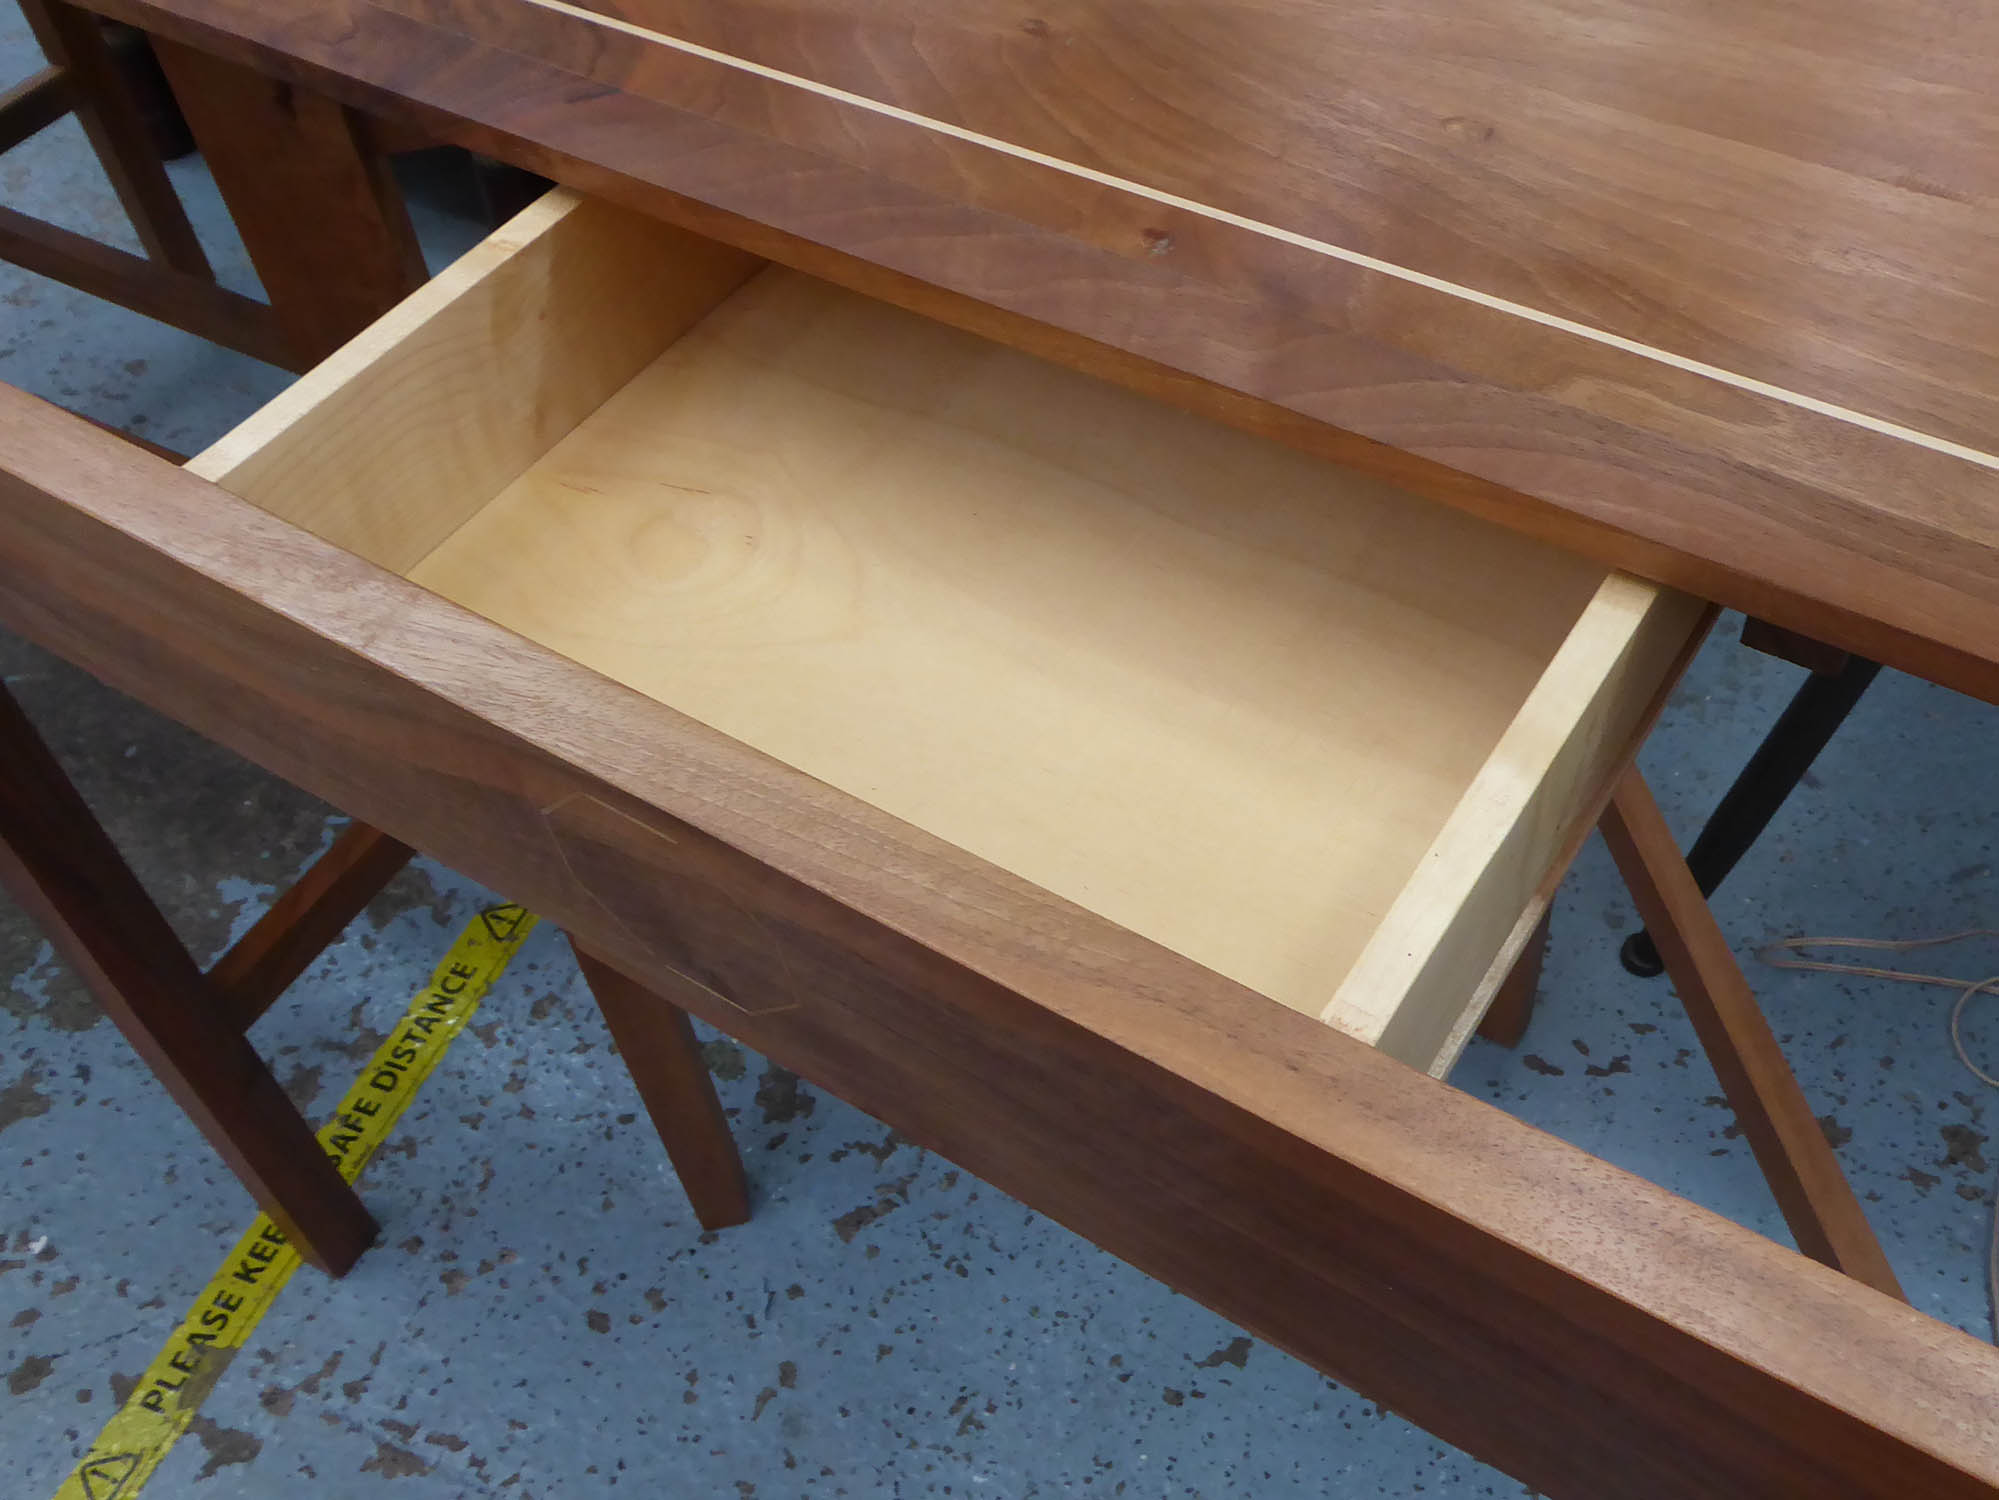 LINLEY STYLE CORNER TABLE, bespoke made, the triangular top over a freize drawer, 92.5cm x 53.5cm - Image 6 of 7